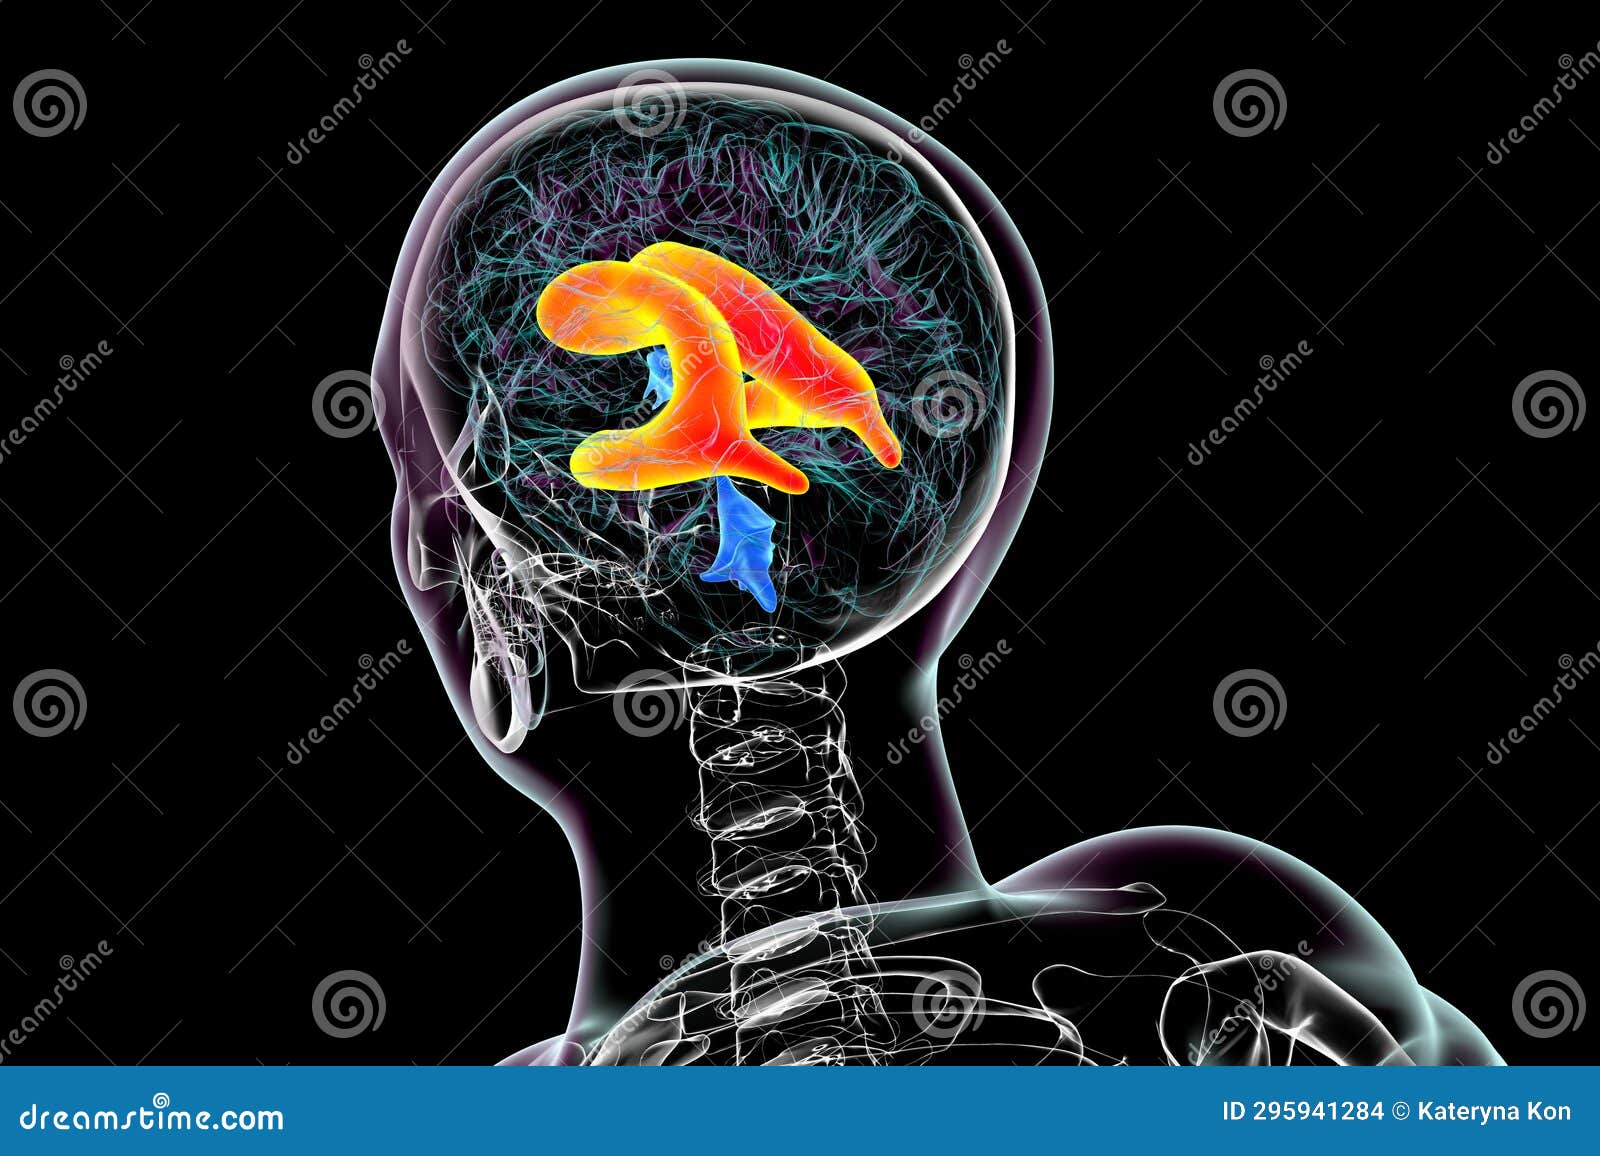 Enlarged Lateral Ventricles Of The Brain 3d Illustration Stock